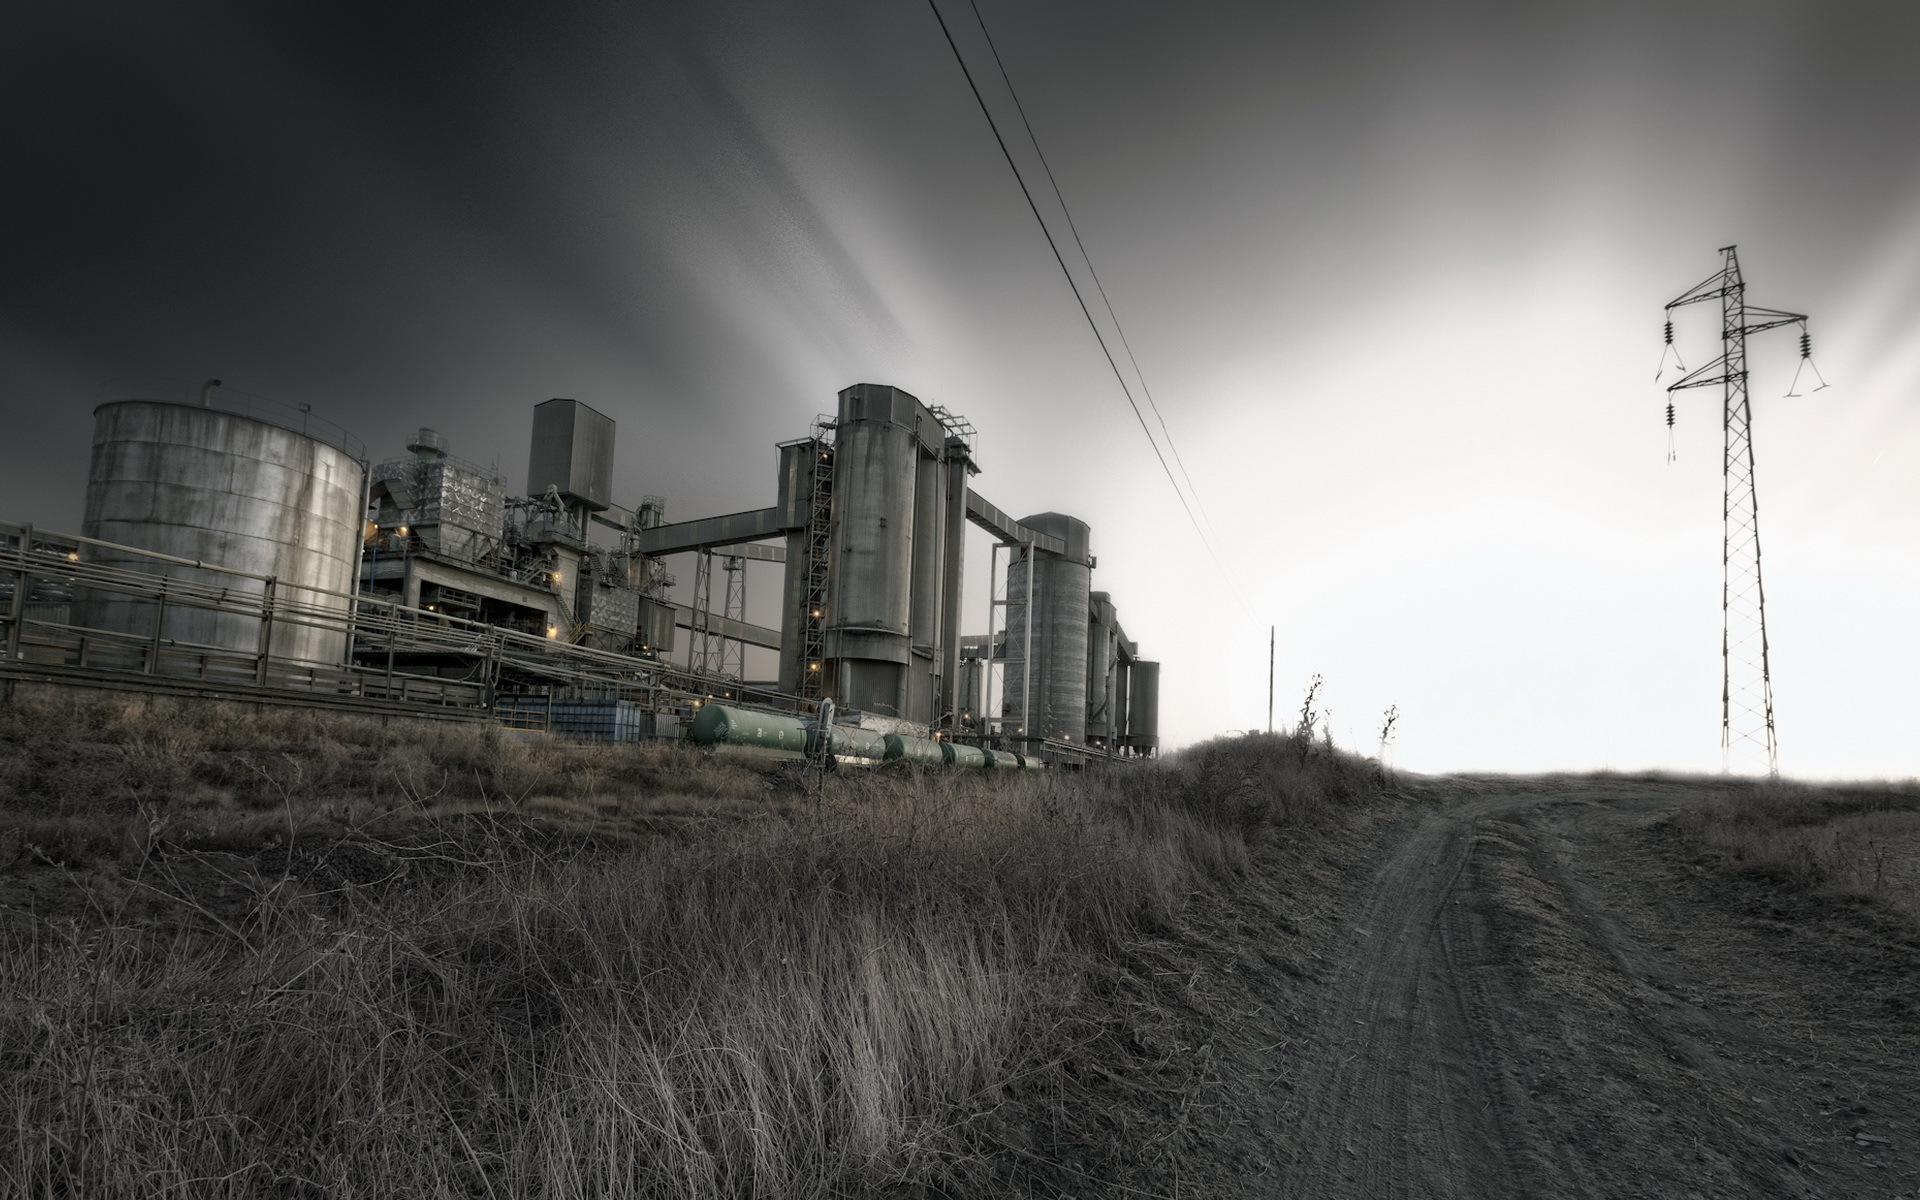 factory, Refinery, Silo, Landscapes, Nature, Roads, Rustic, Steel, Sky